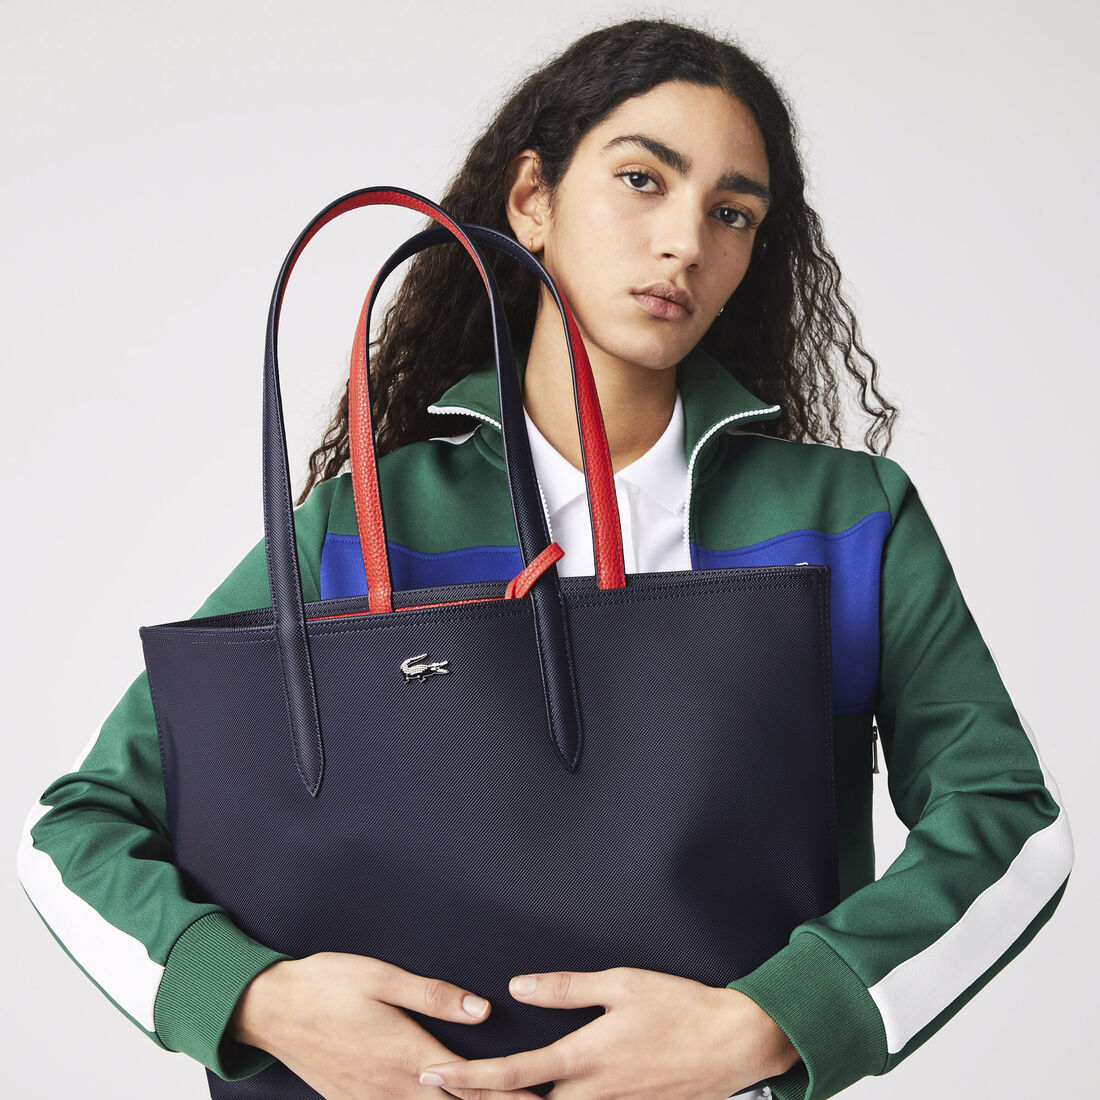 Lacoste Outlet: Lacoste Shoes,Clothing | Lacoste USA